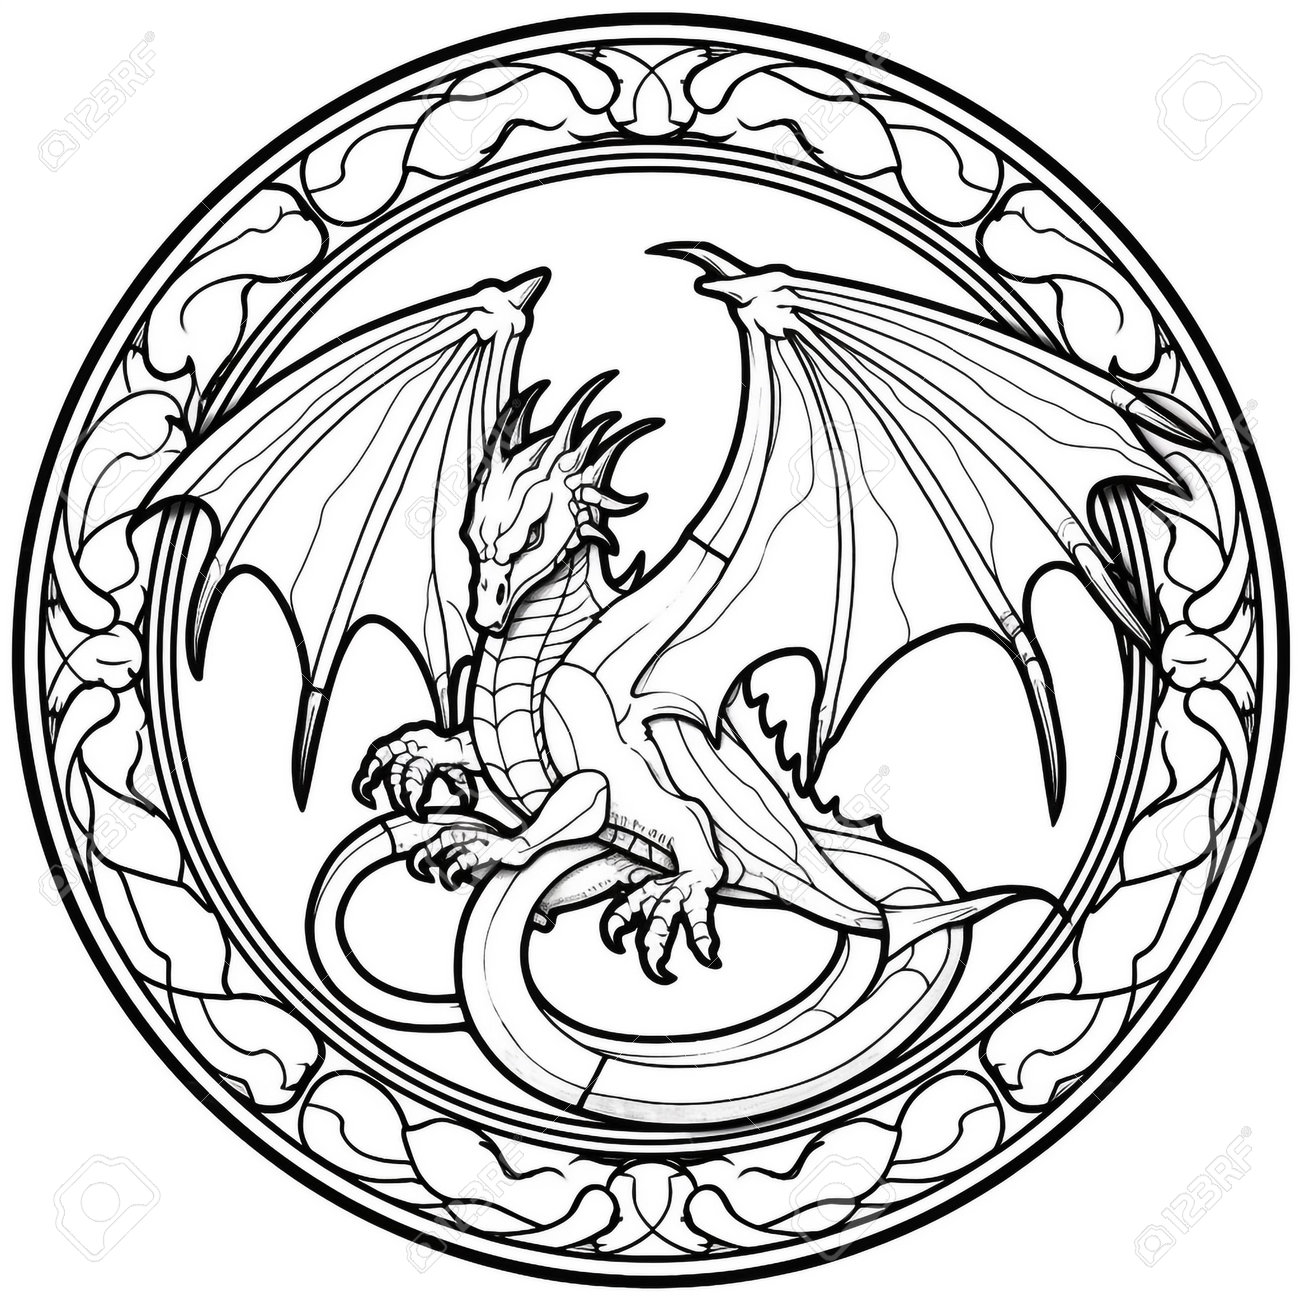 Stained glass dragon coloring pages stock photo picture and royalty free image image